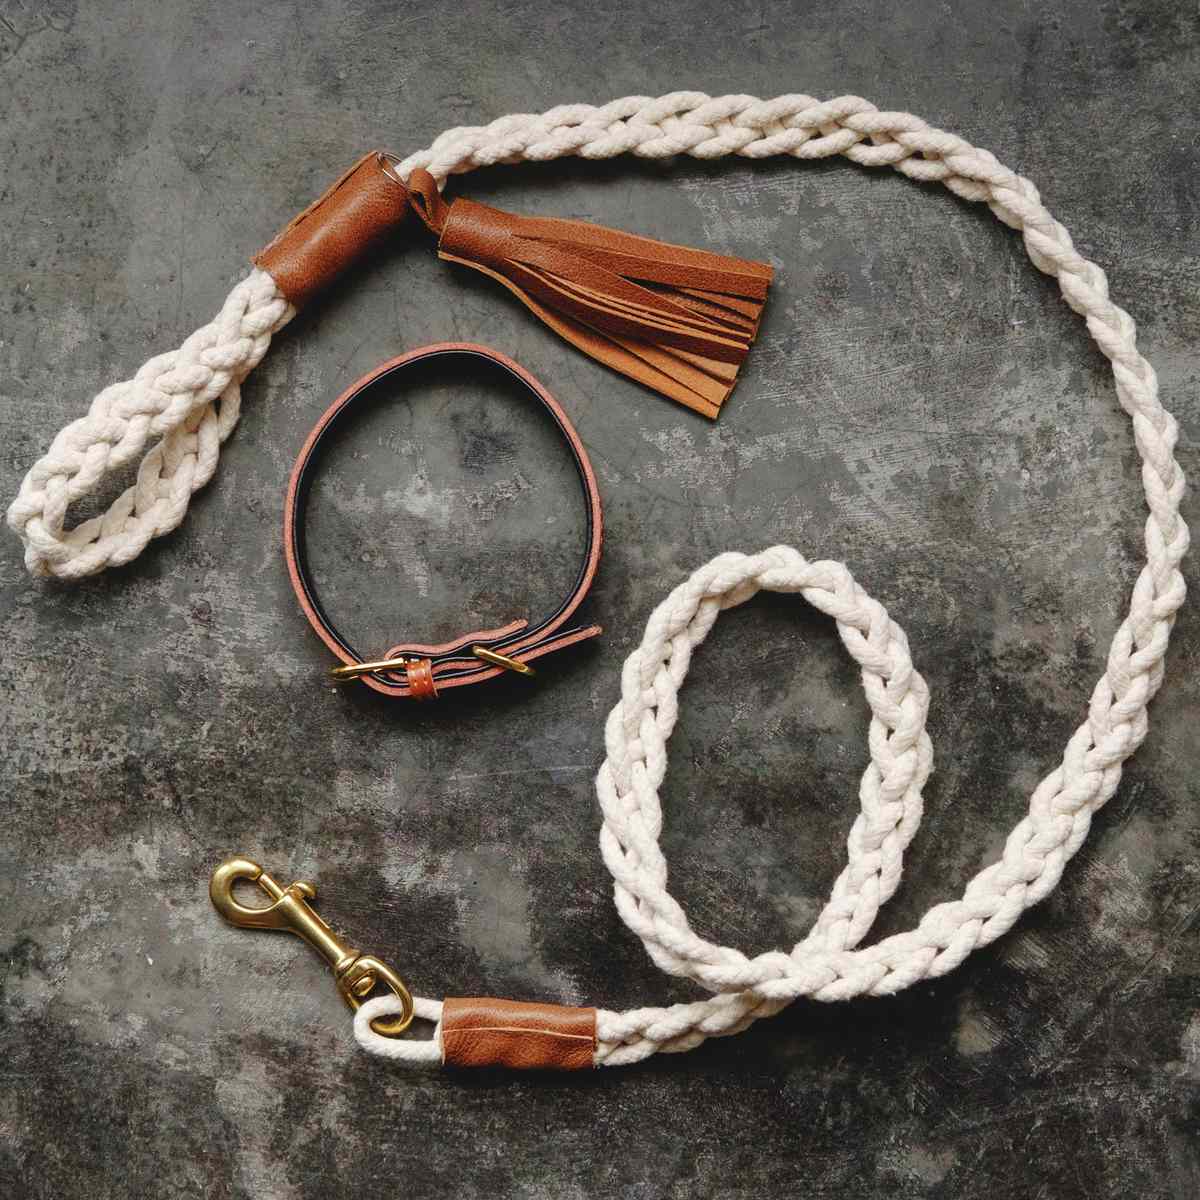 Braided Rope Dog Leash with Leather Details